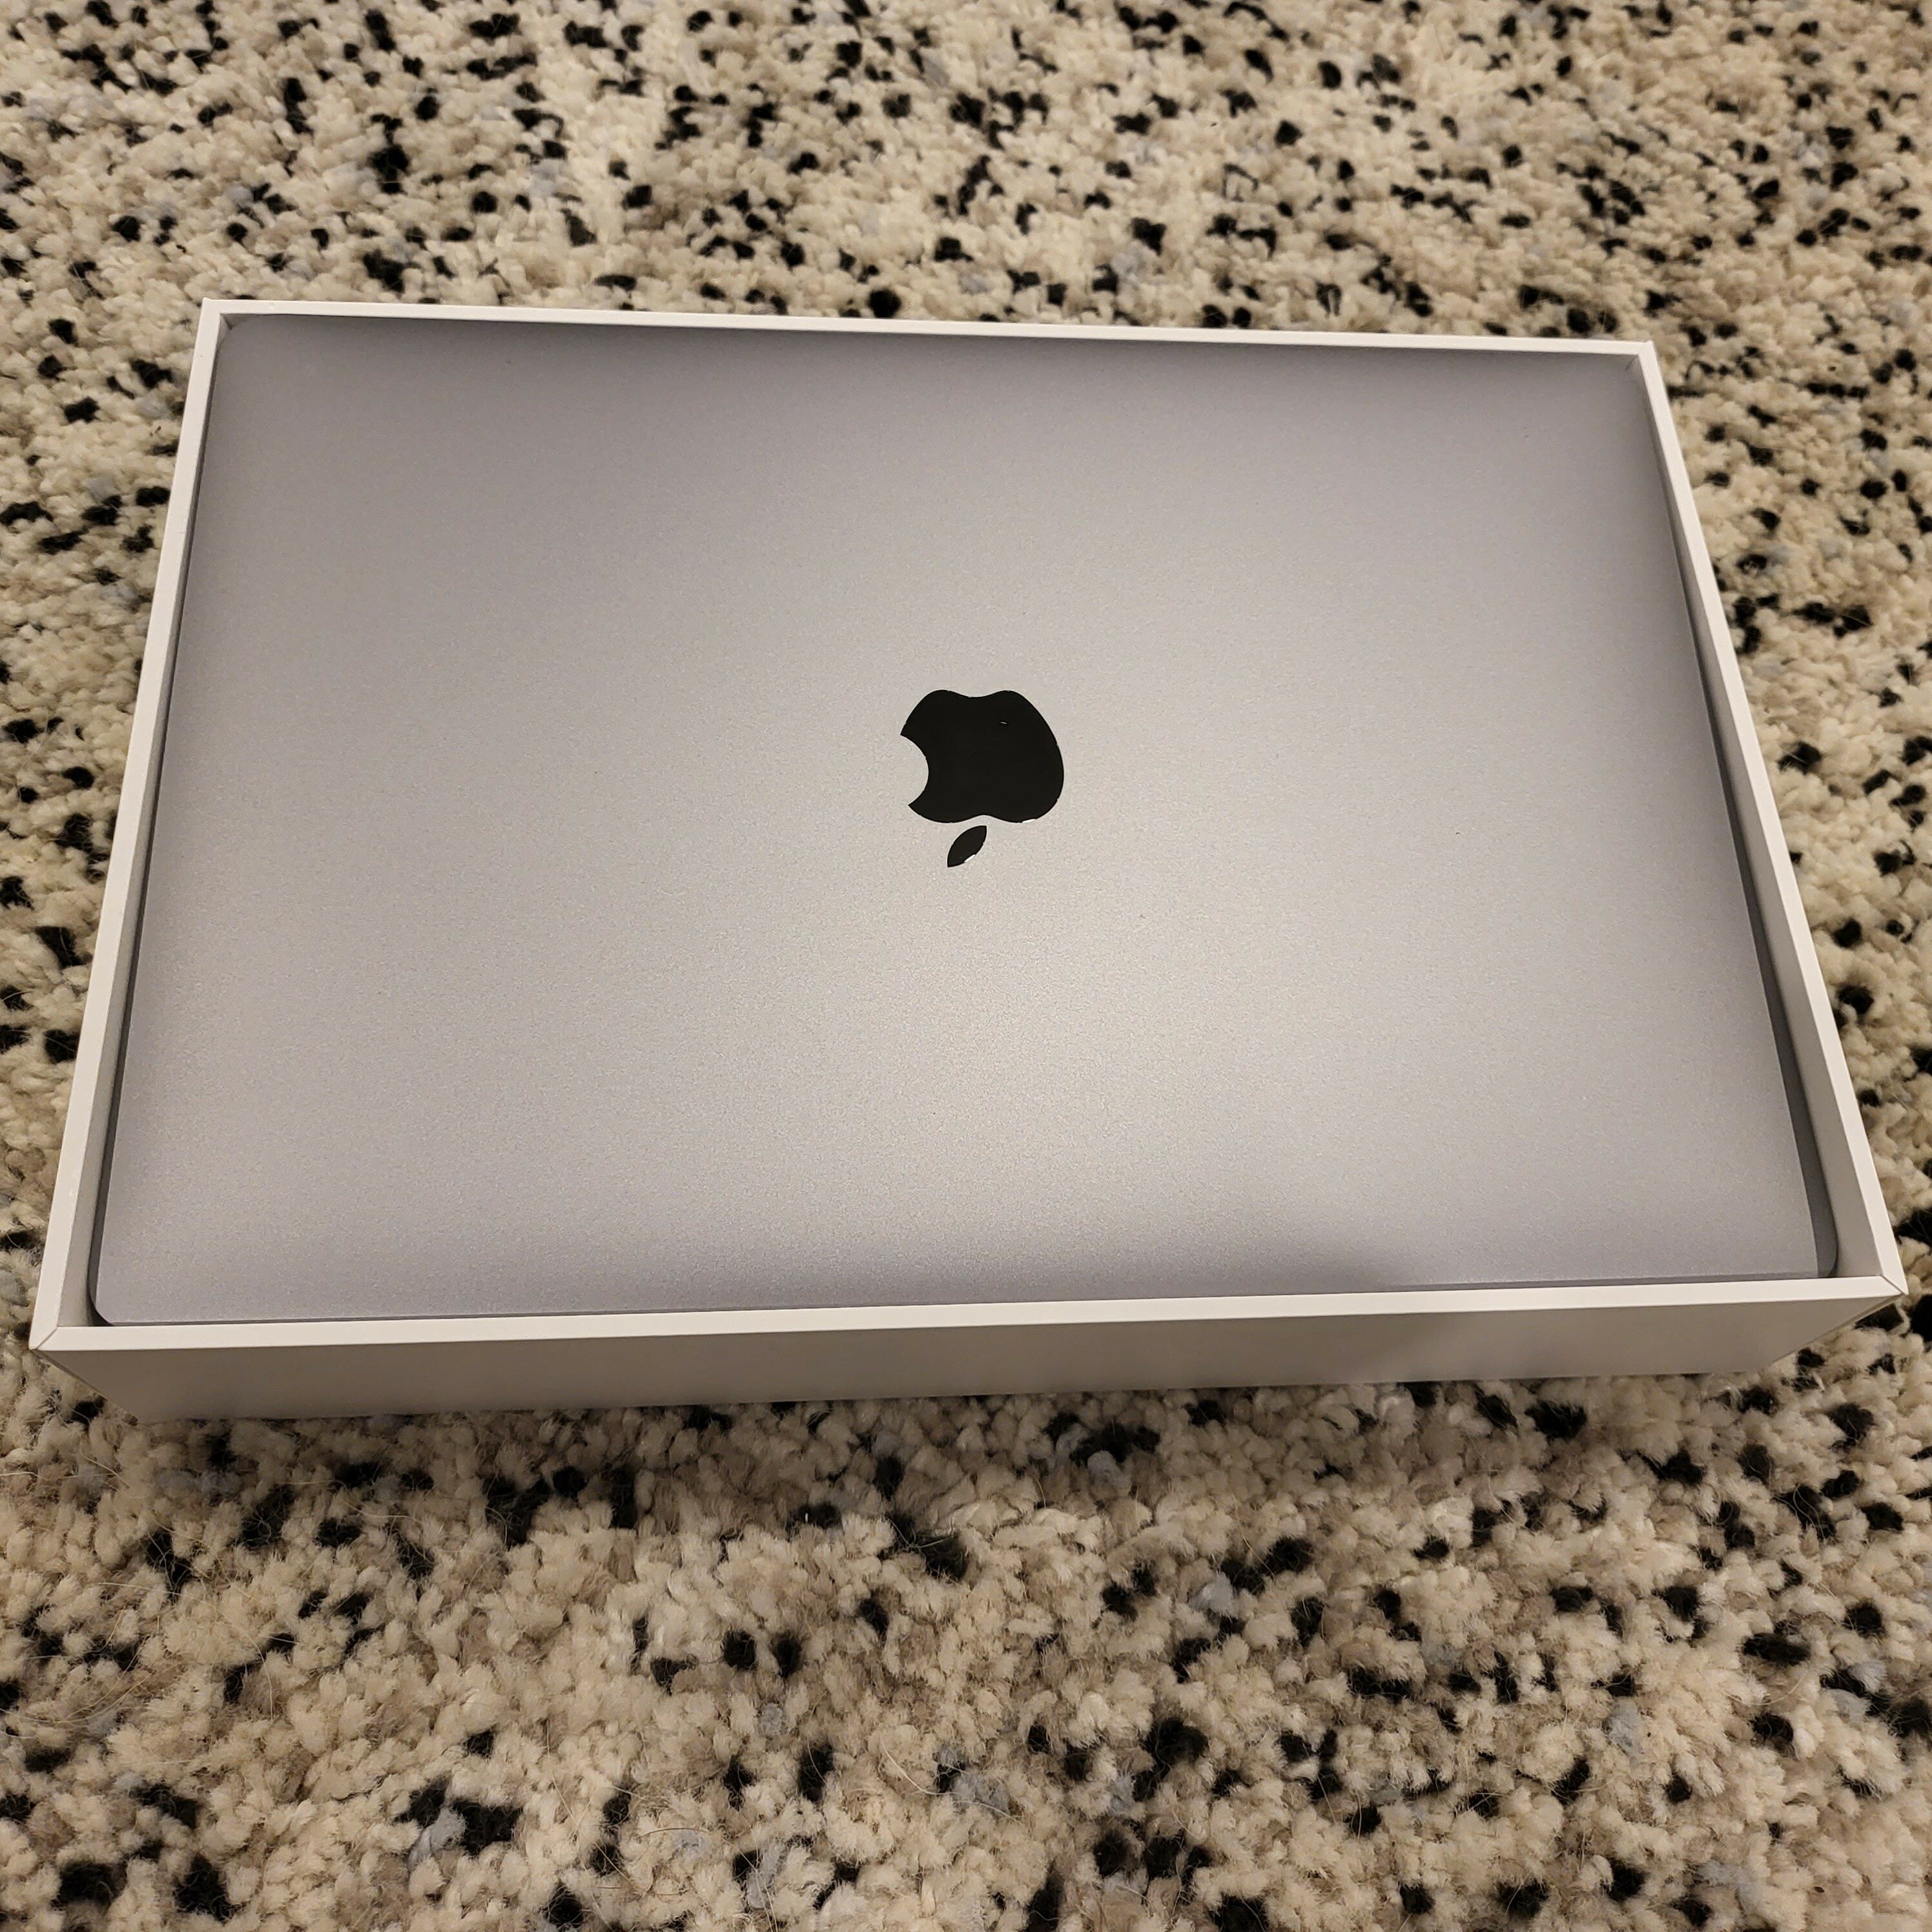 Macbook Air 13 inch with 16GB / 256GB SSD with Retina Display and 